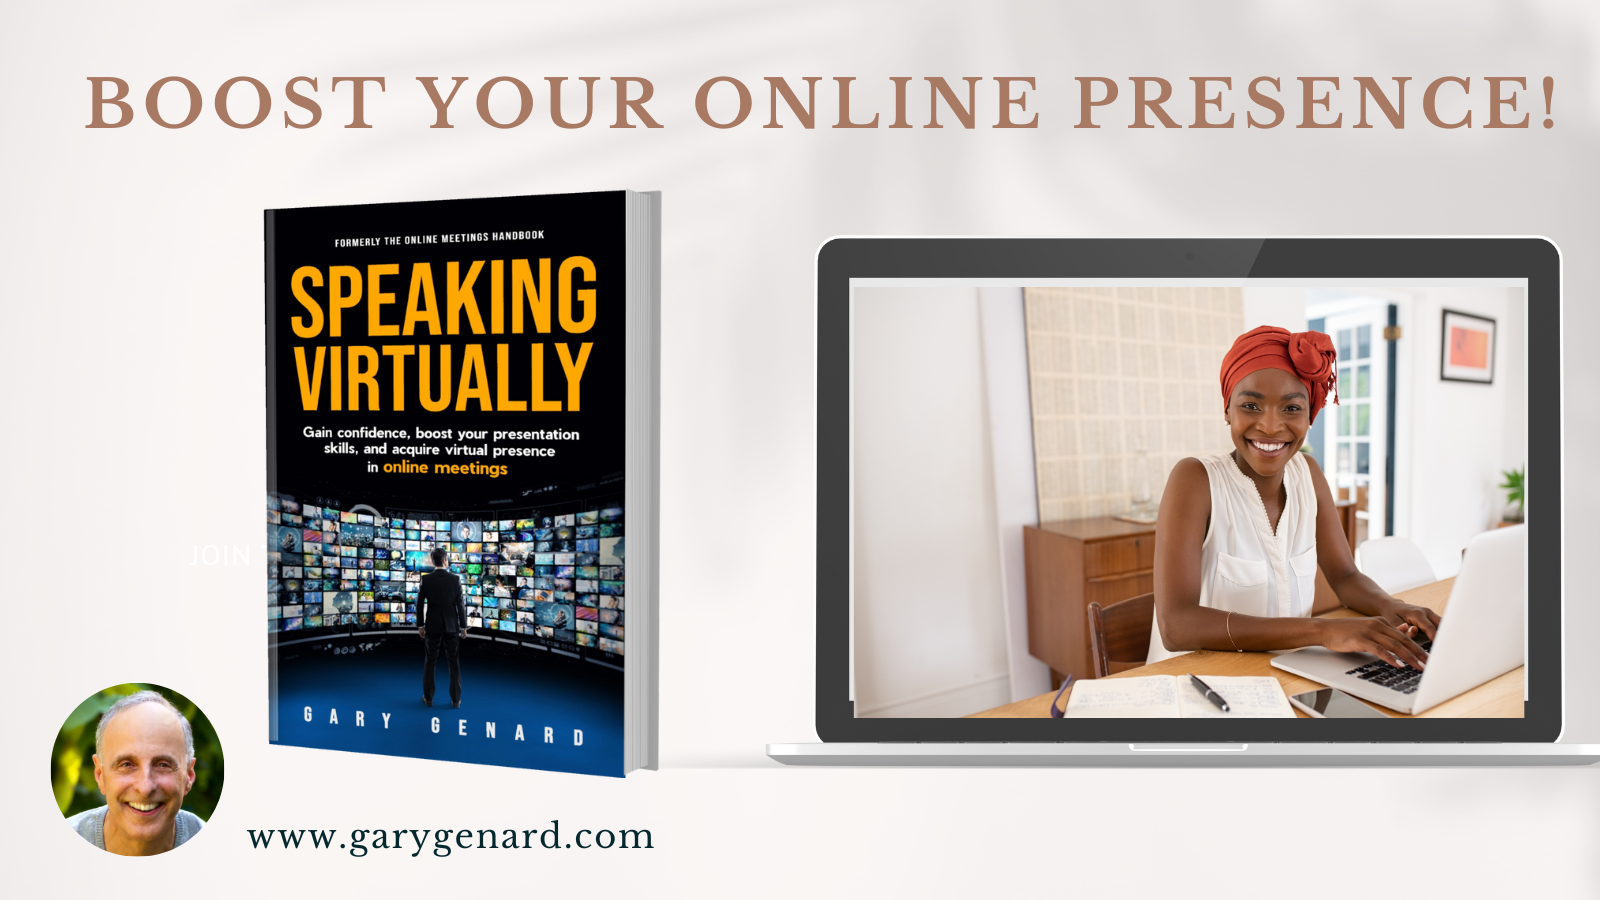 Boost your online presence with Dr. Gary Genard's book, Speaking Virtually.